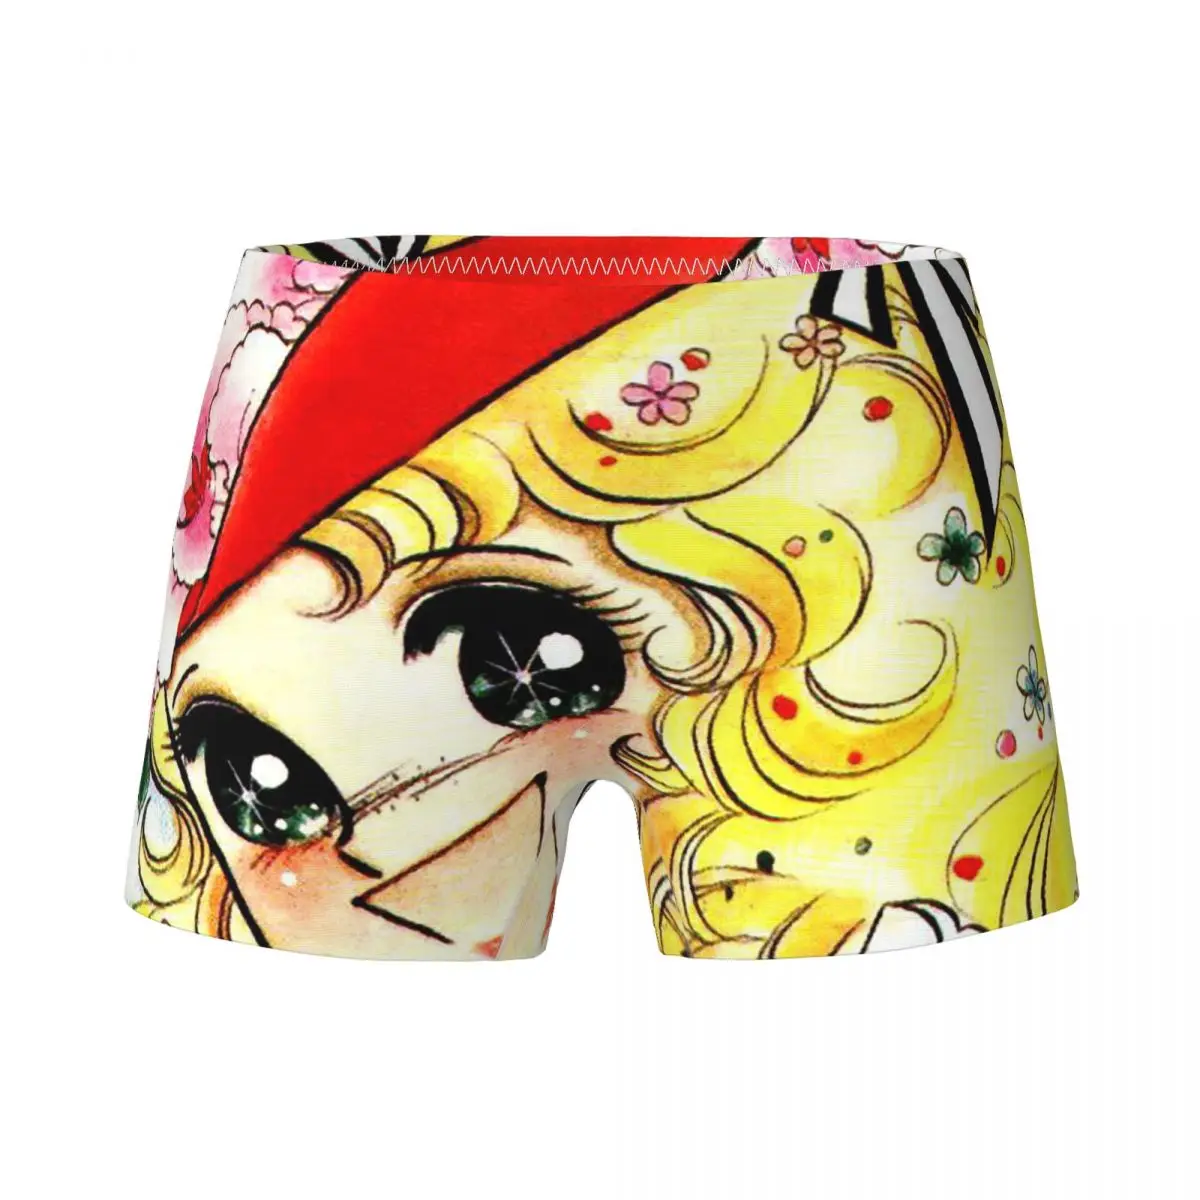 

Candy Candy Anime Children's Girls Underwear Kids Pretty Boxer Briefs Soft Cotton Teenagers Panties Kawaii Girl Underpants 4-15Y